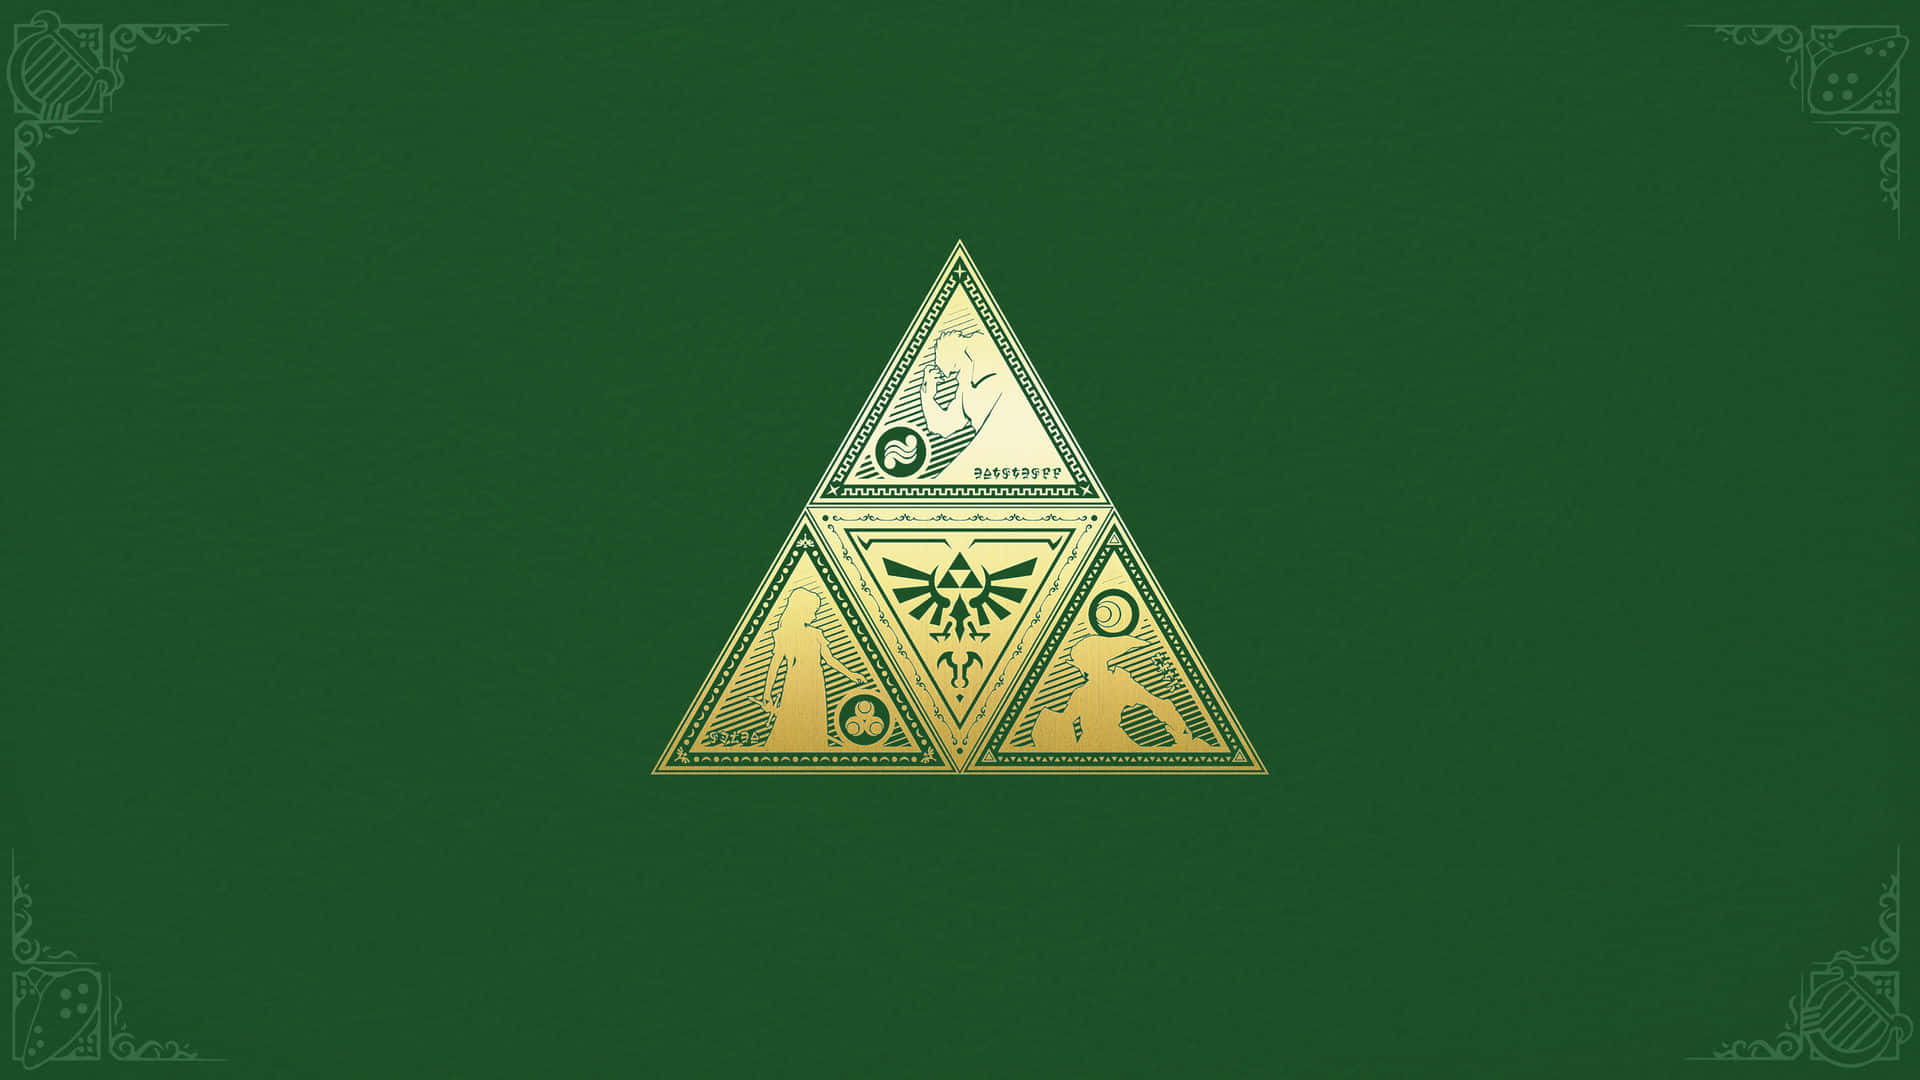 Follow the path of the Triforce Wallpaper